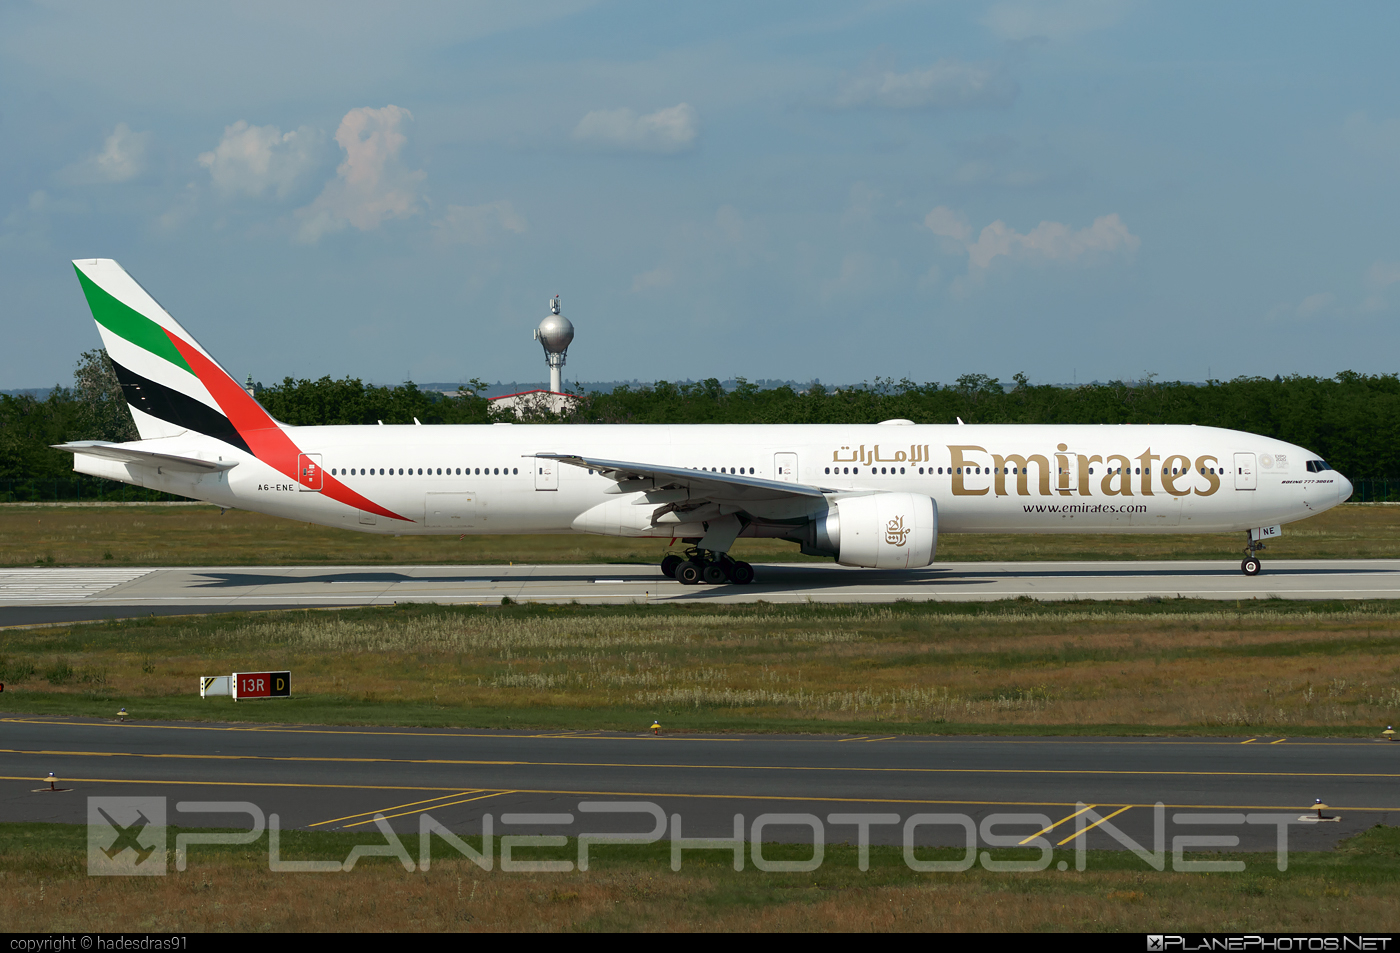 Boeing 777-300ER - A6-ENE operated by Emirates #b777 #b777er #boeing #boeing777 #emirates #tripleseven